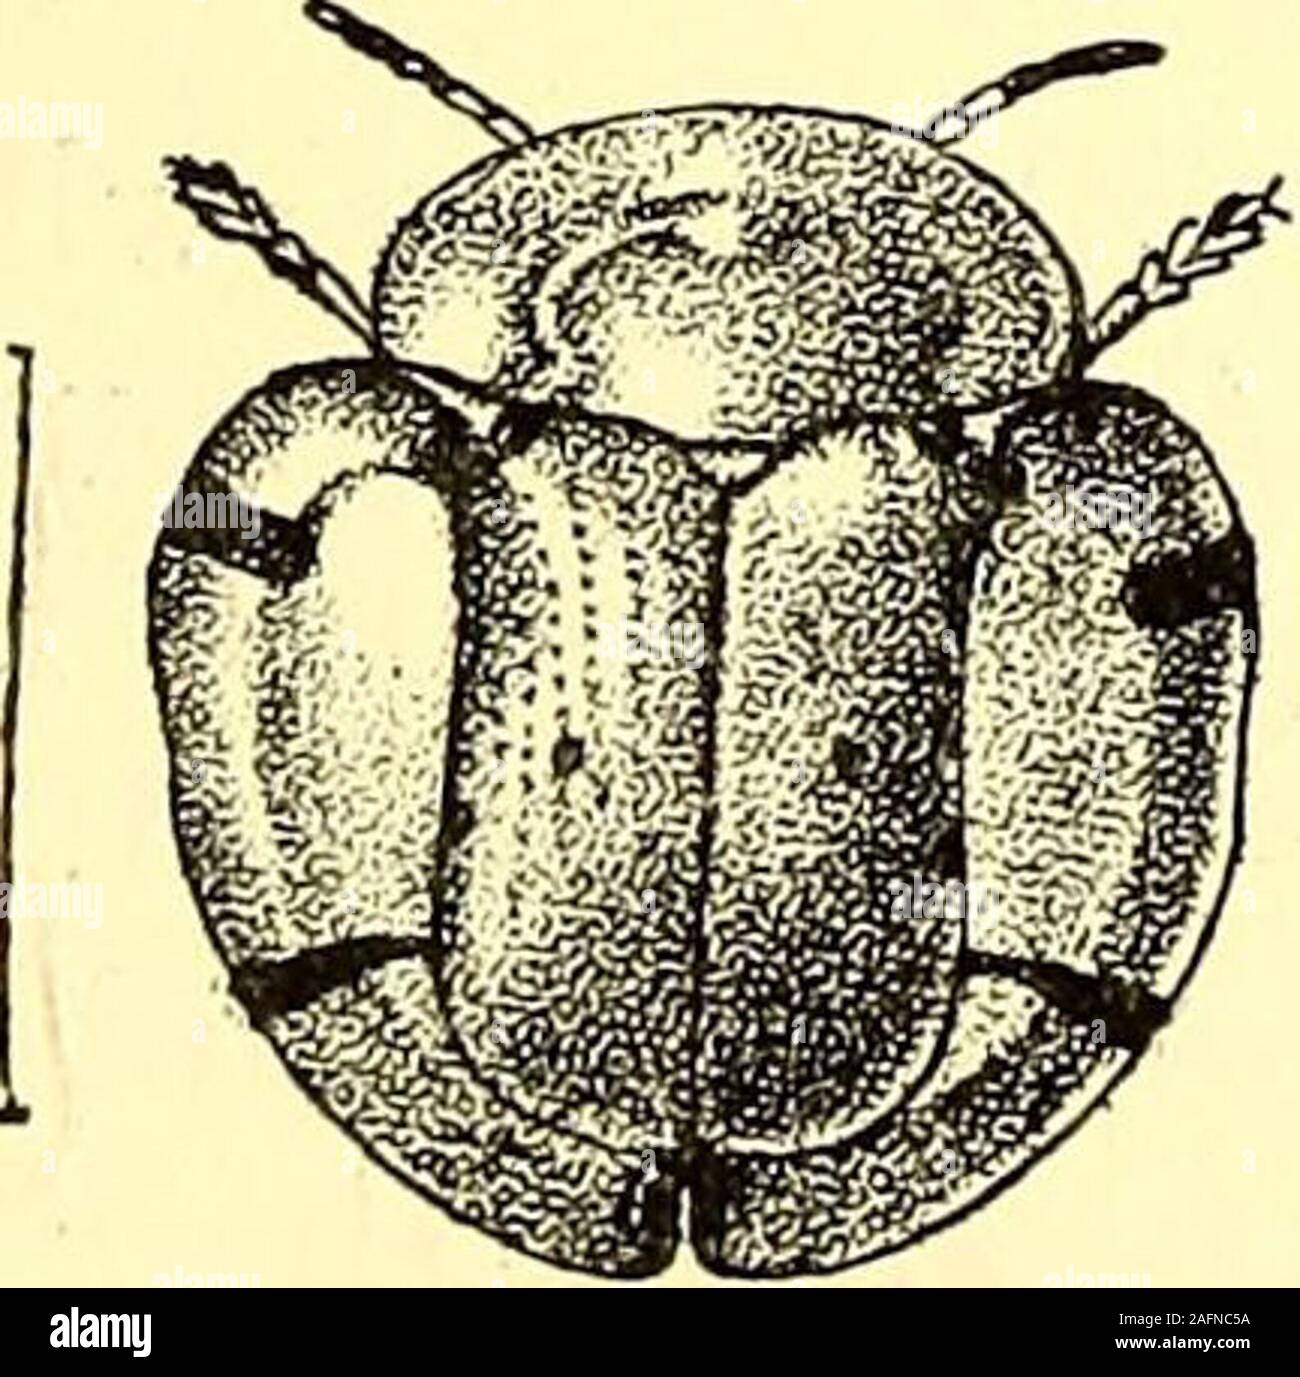 . Coleoptera : general introduction and Cicindelidae and Paussidae. Fig. 83.—Botryo-nopa sh&ppardi. The larvae of the Cassidi?st.e are remarkable for their habit of. Stock Photo